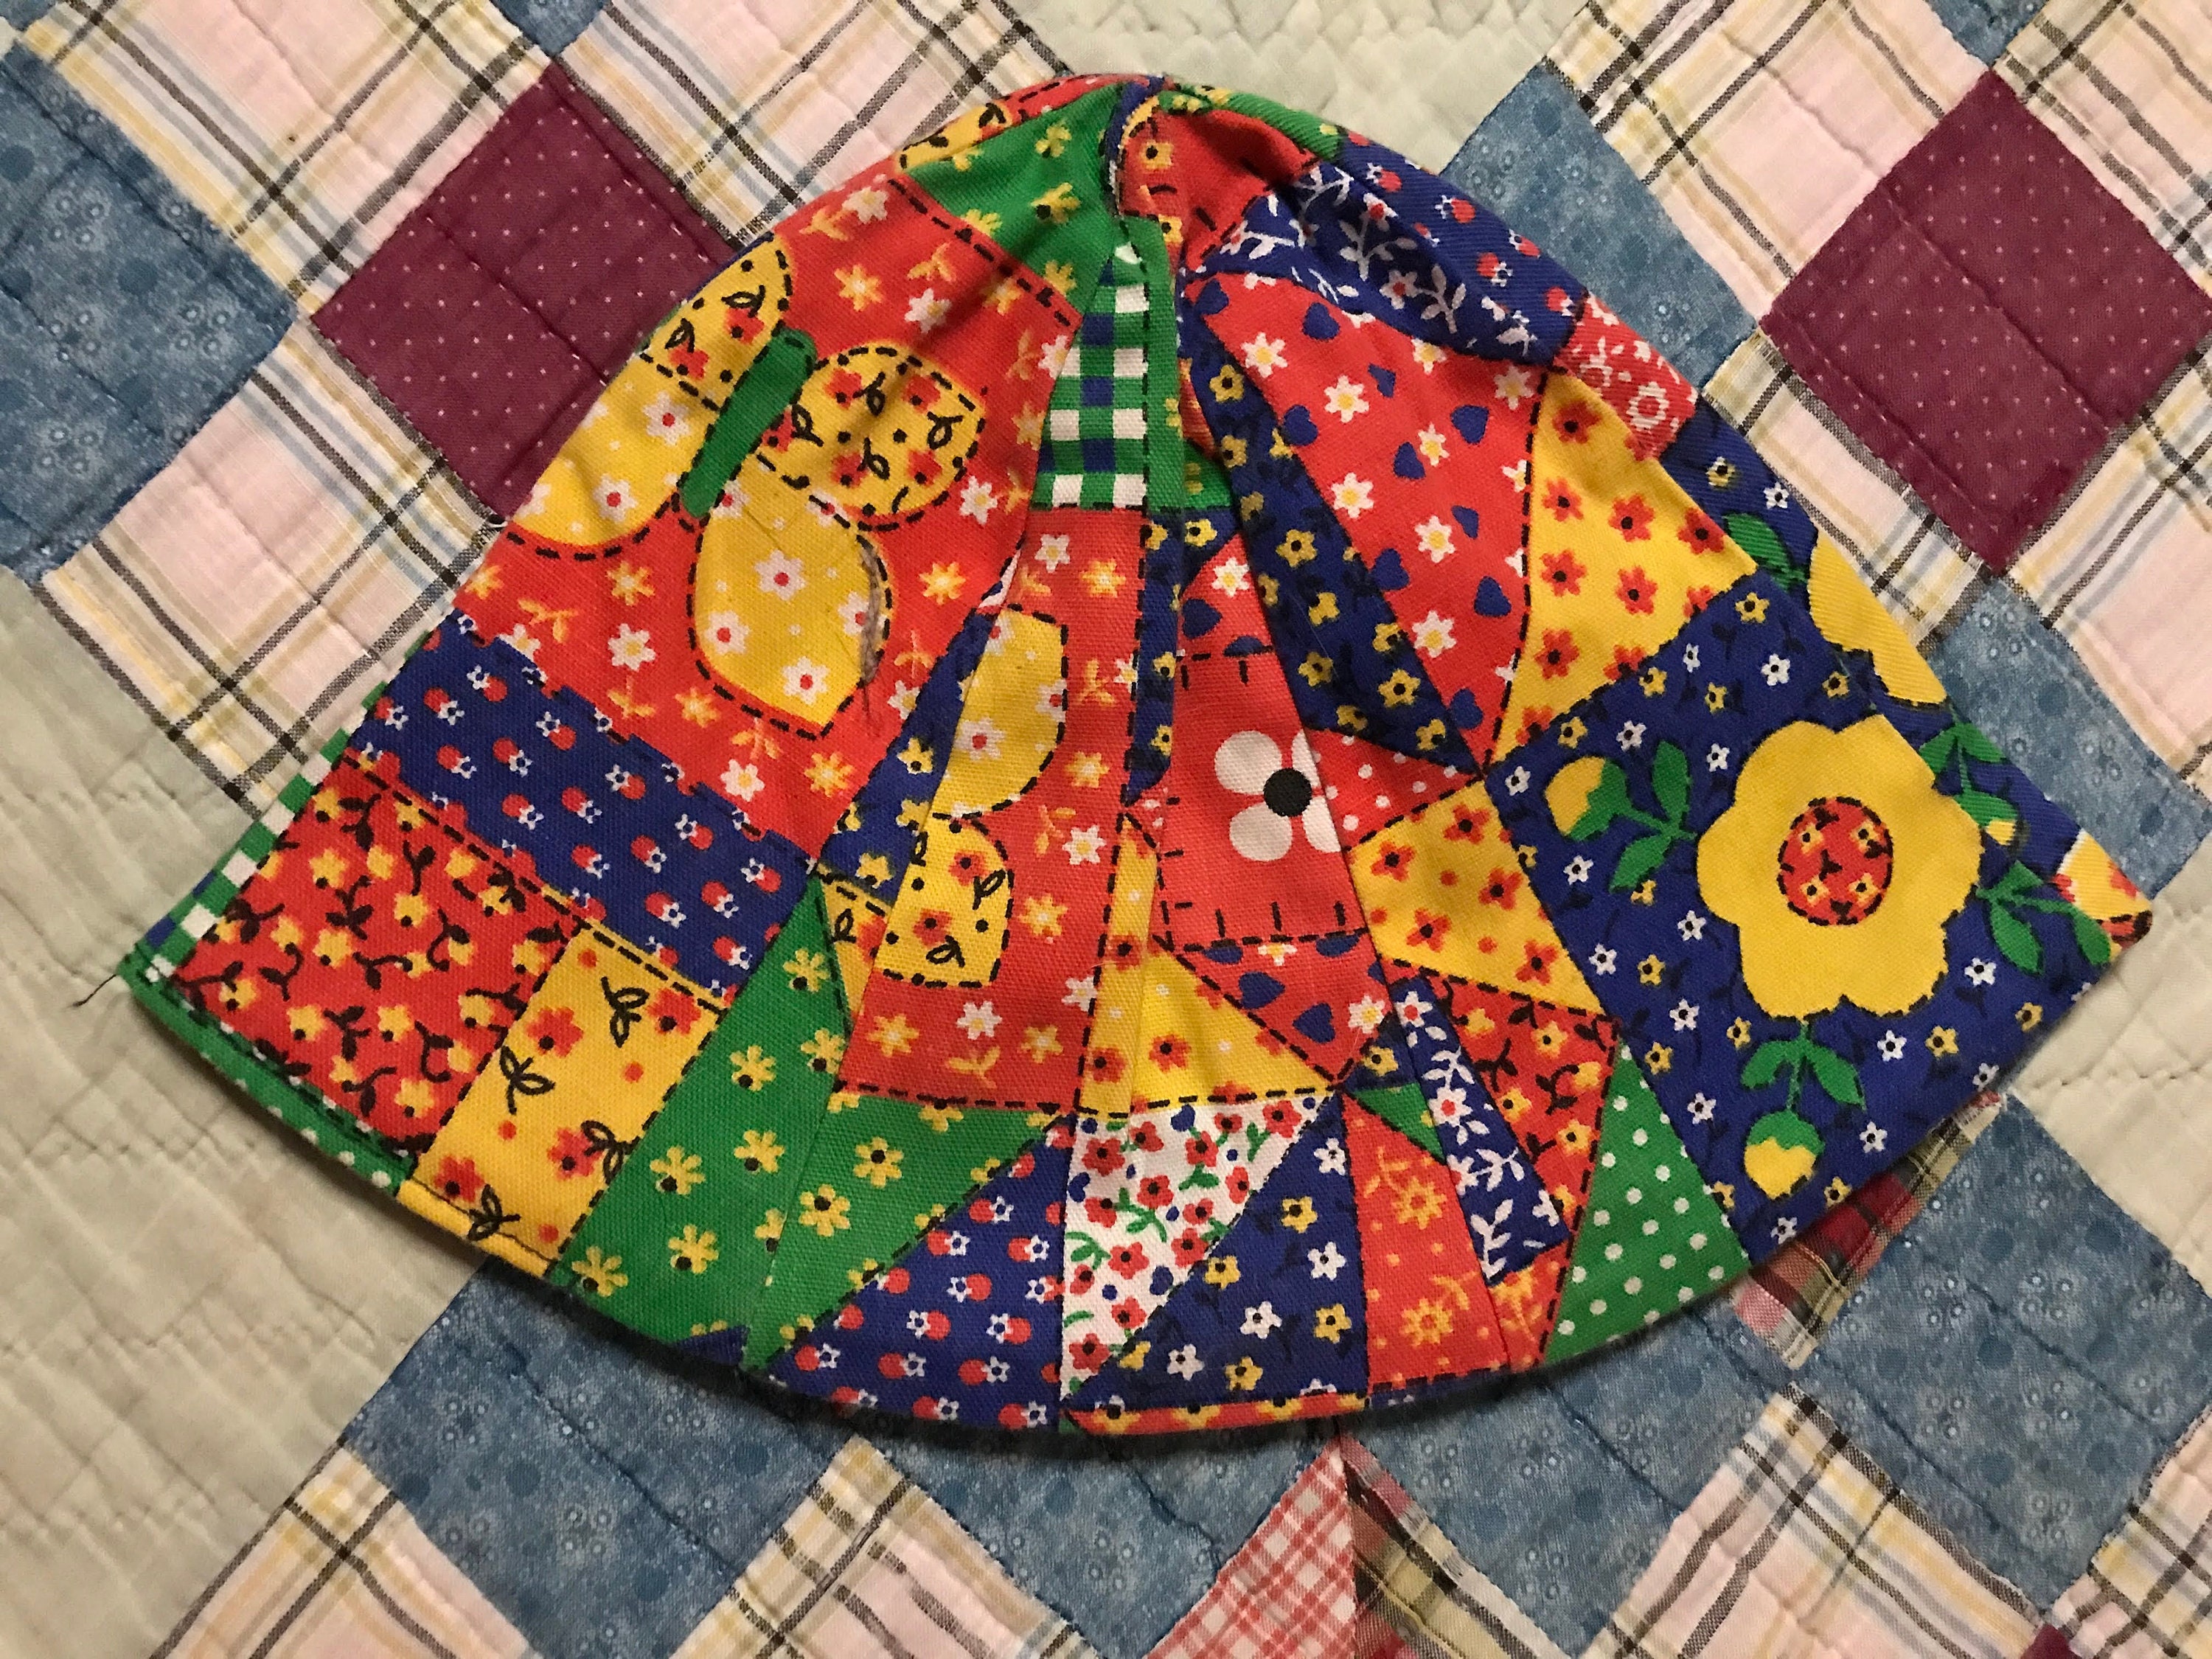 Handmade, Reversible, Patchwork Quilt, Colorful, Size King/queen 110 X 90  With Cotton Batting 